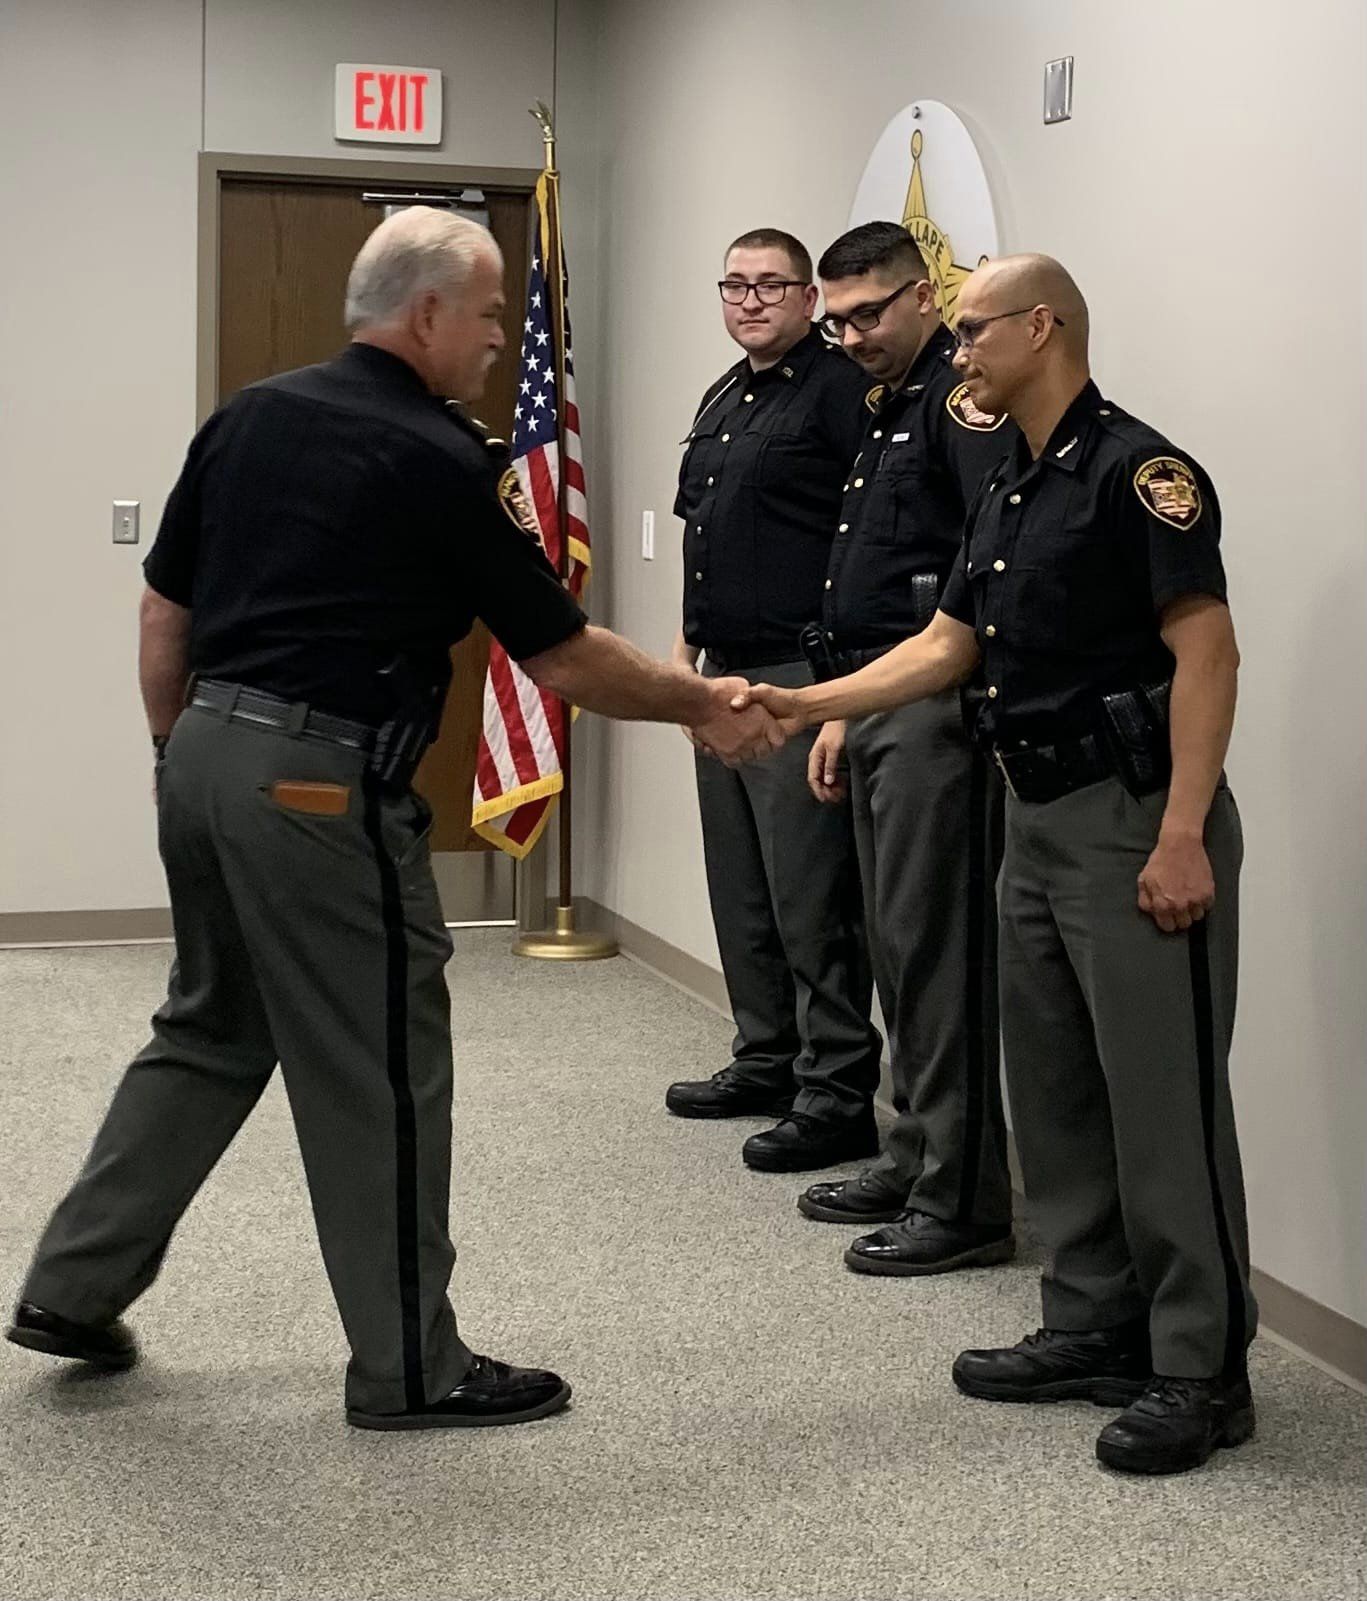 Sheriff Lape shaking hands with new members